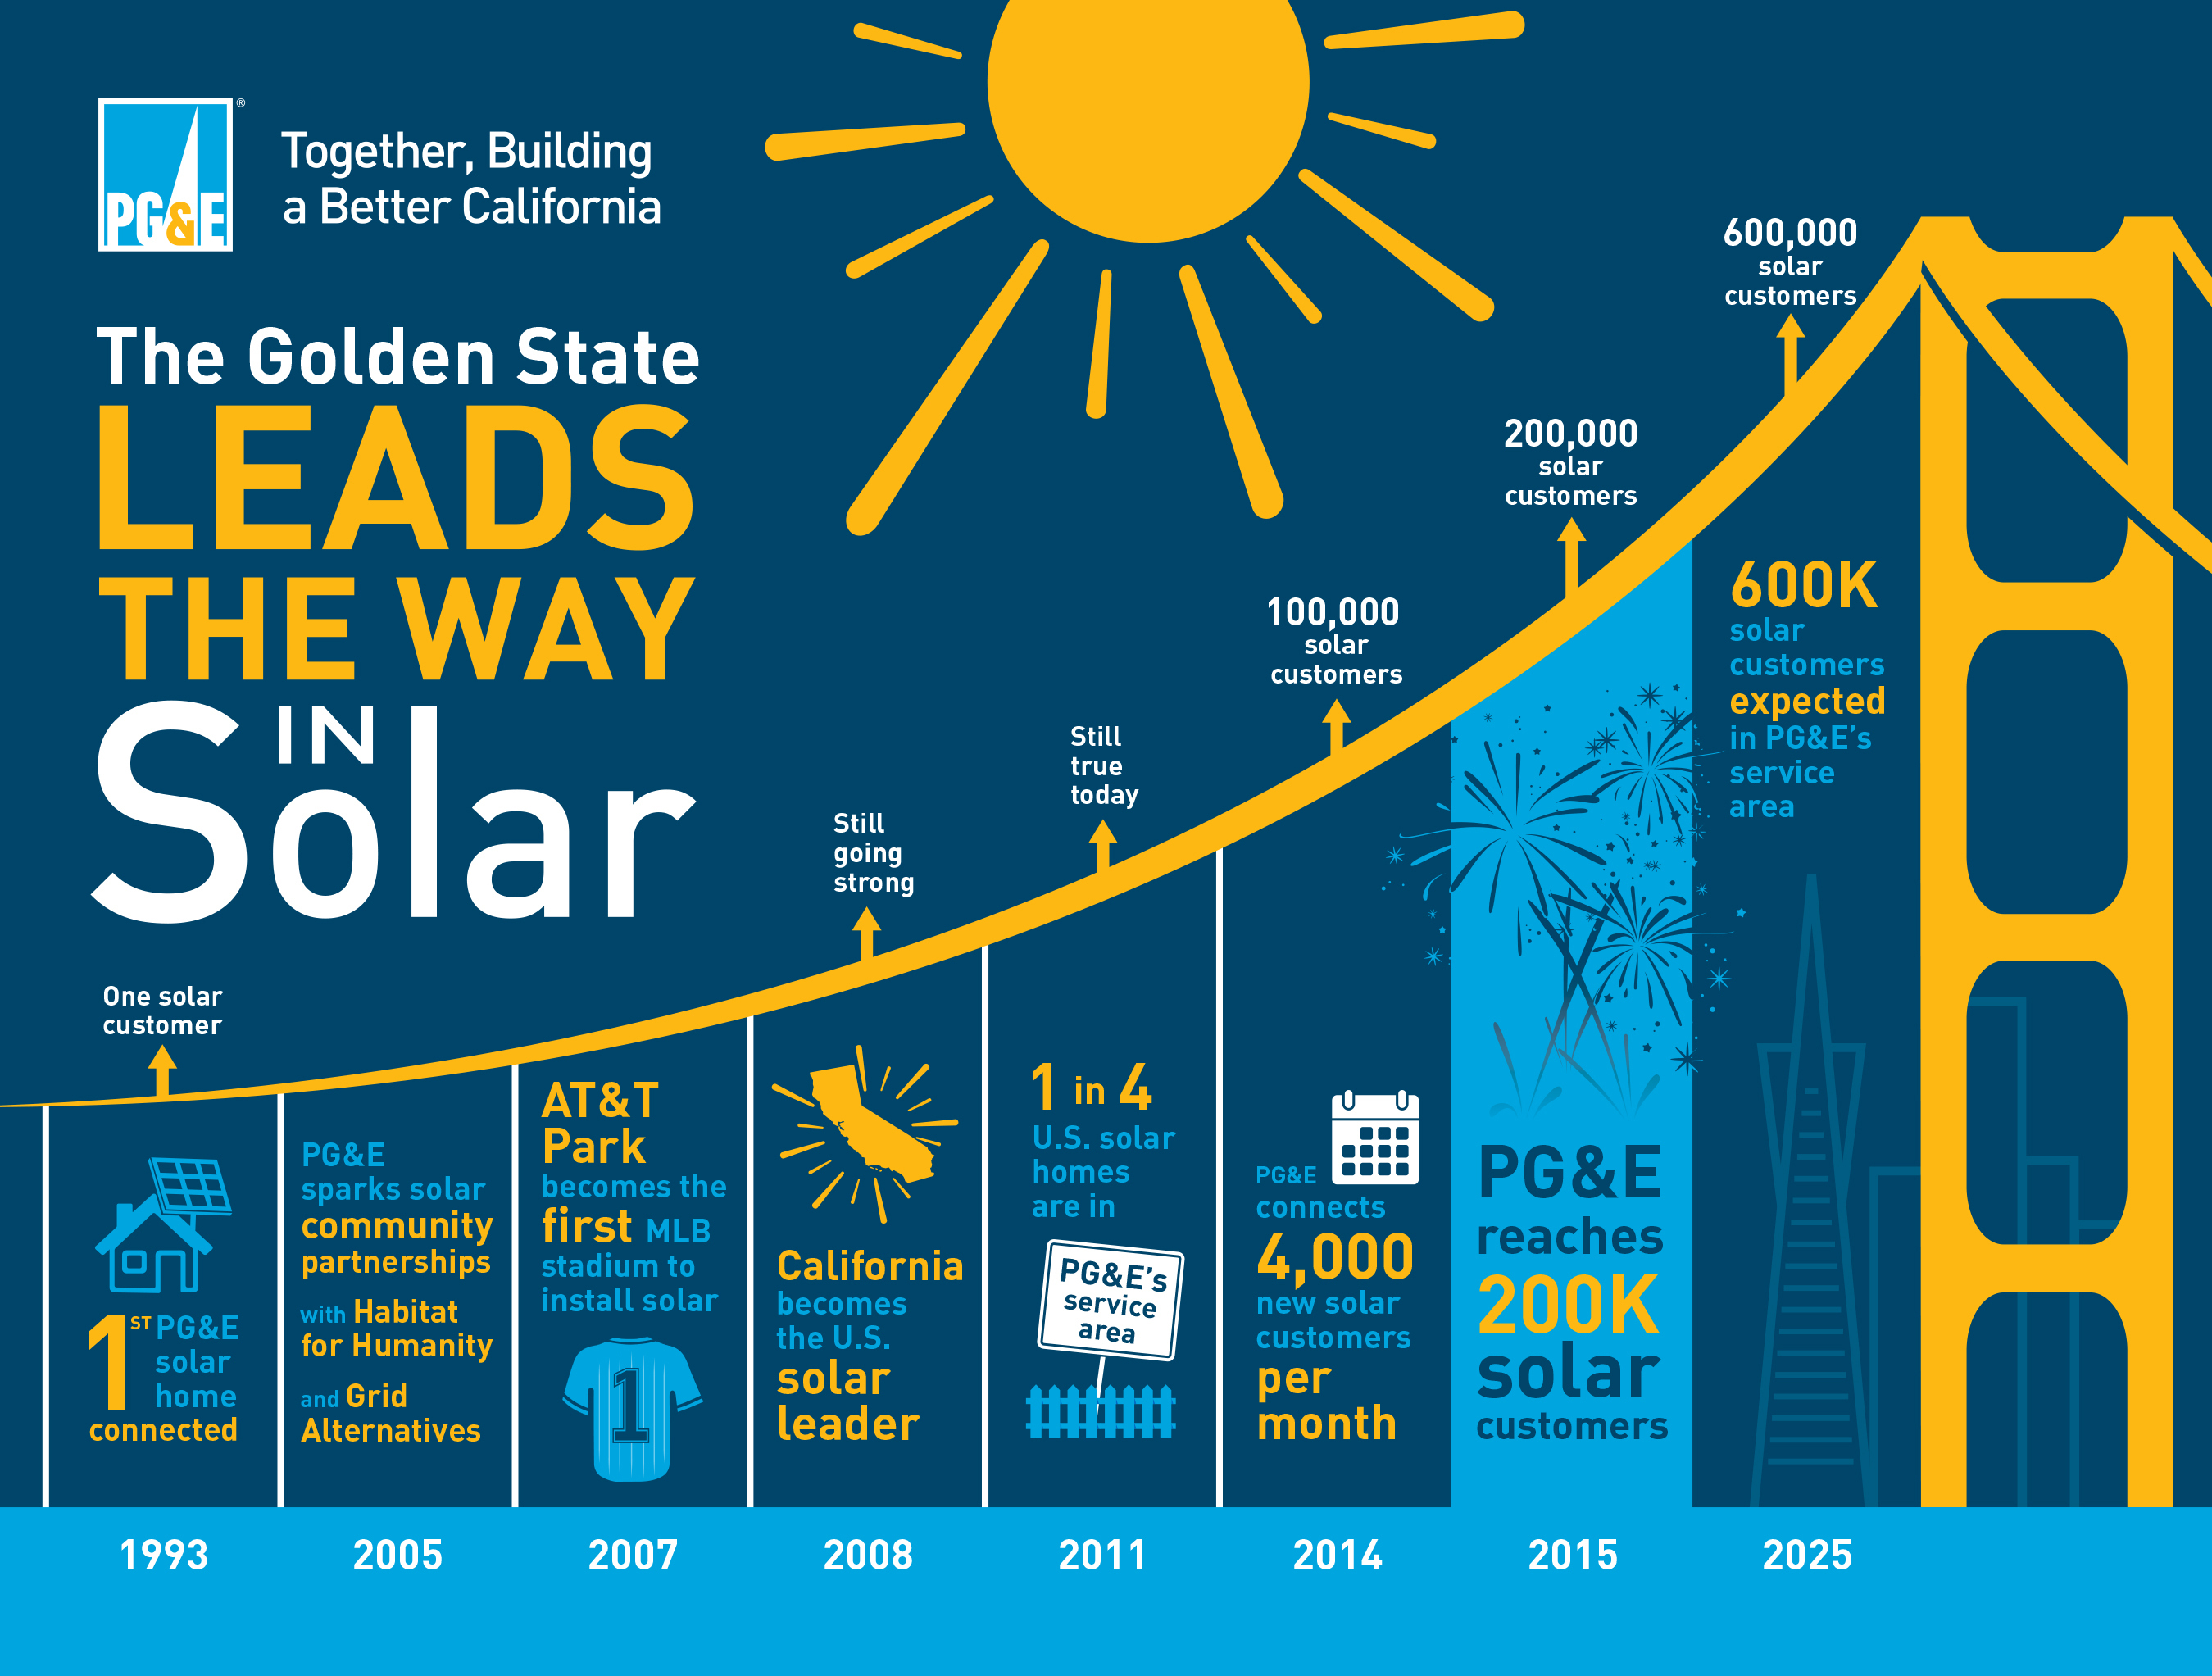 pg-e-leads-the-nation-with-200-000-solar-customers-business-wire